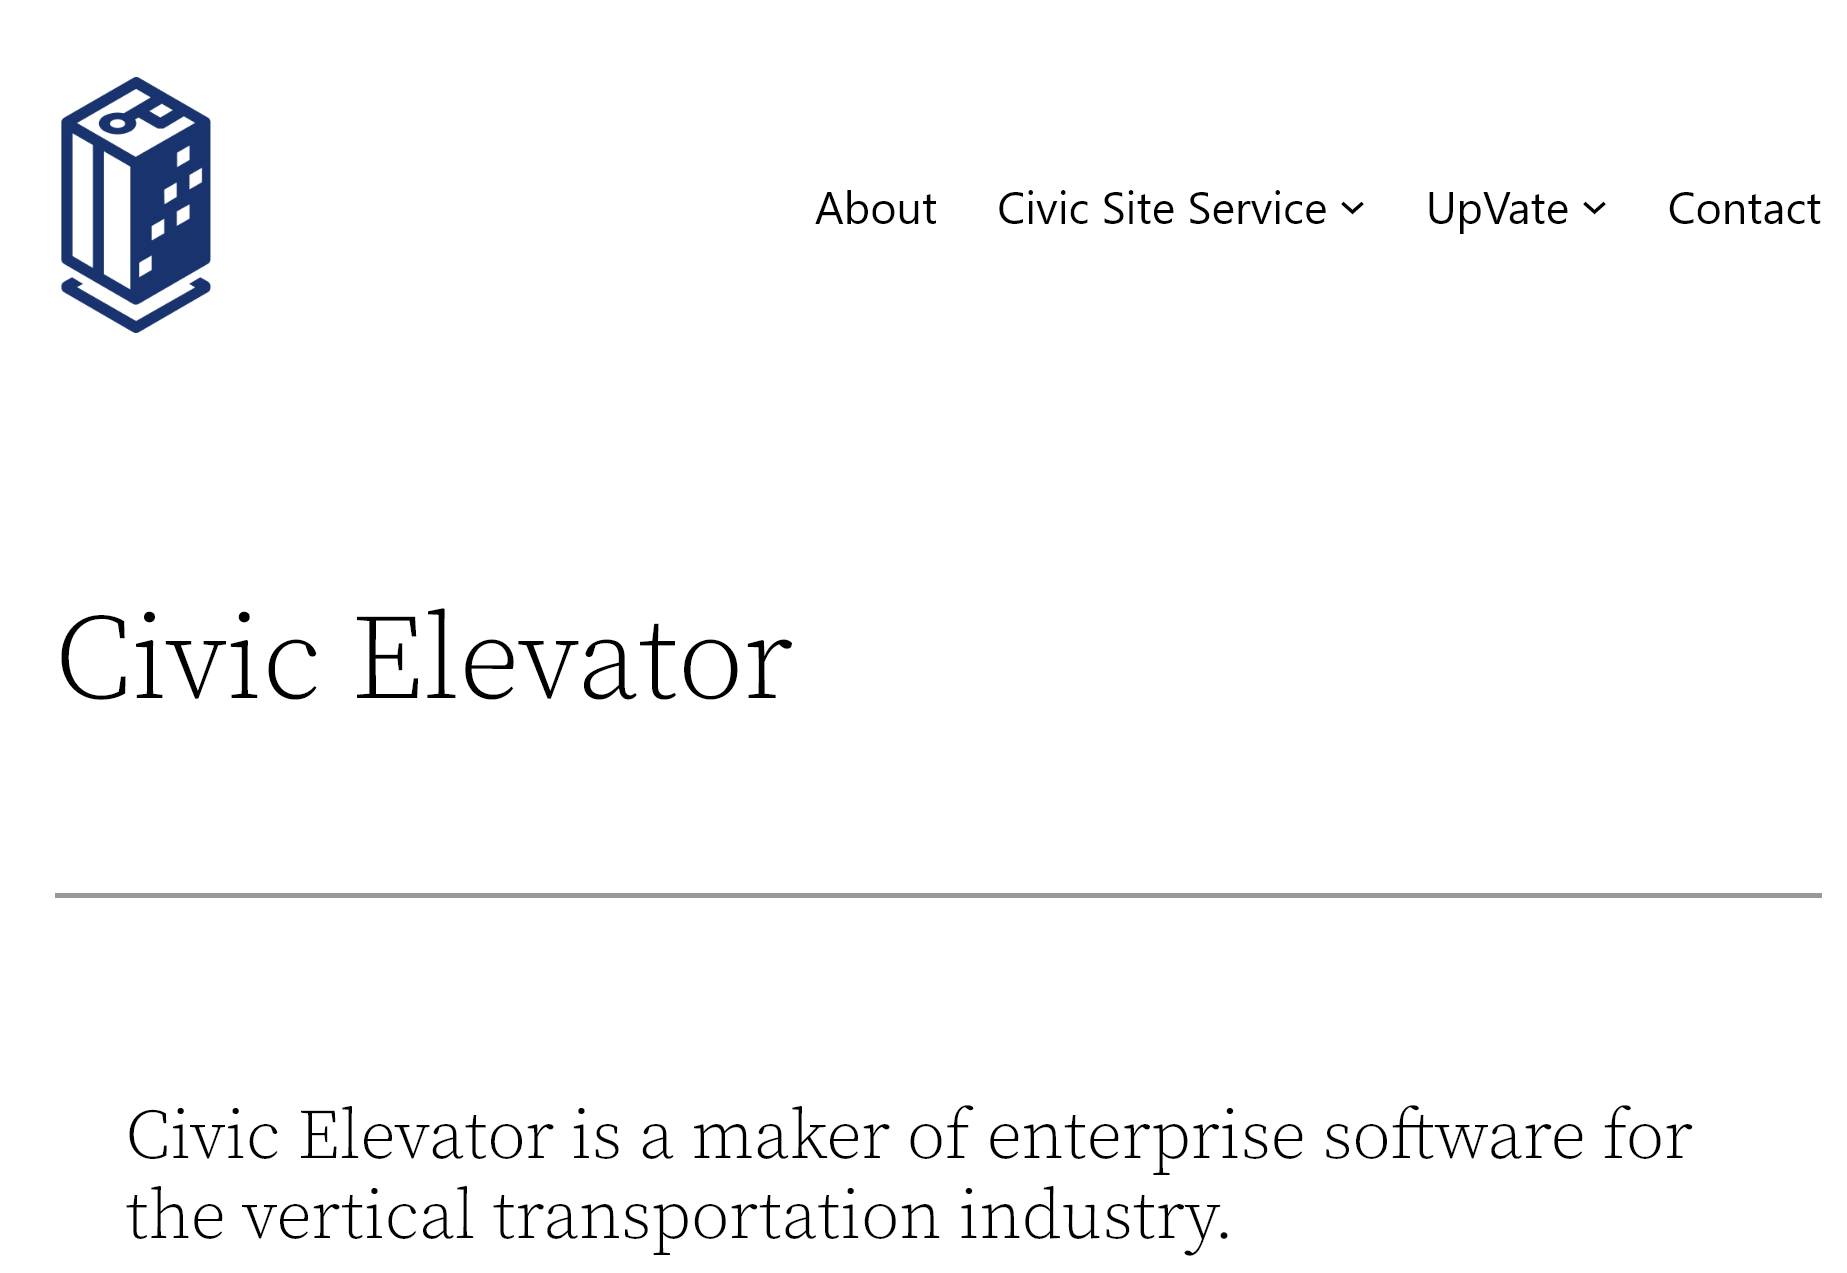 Launch: Civic Elevator website and product offering